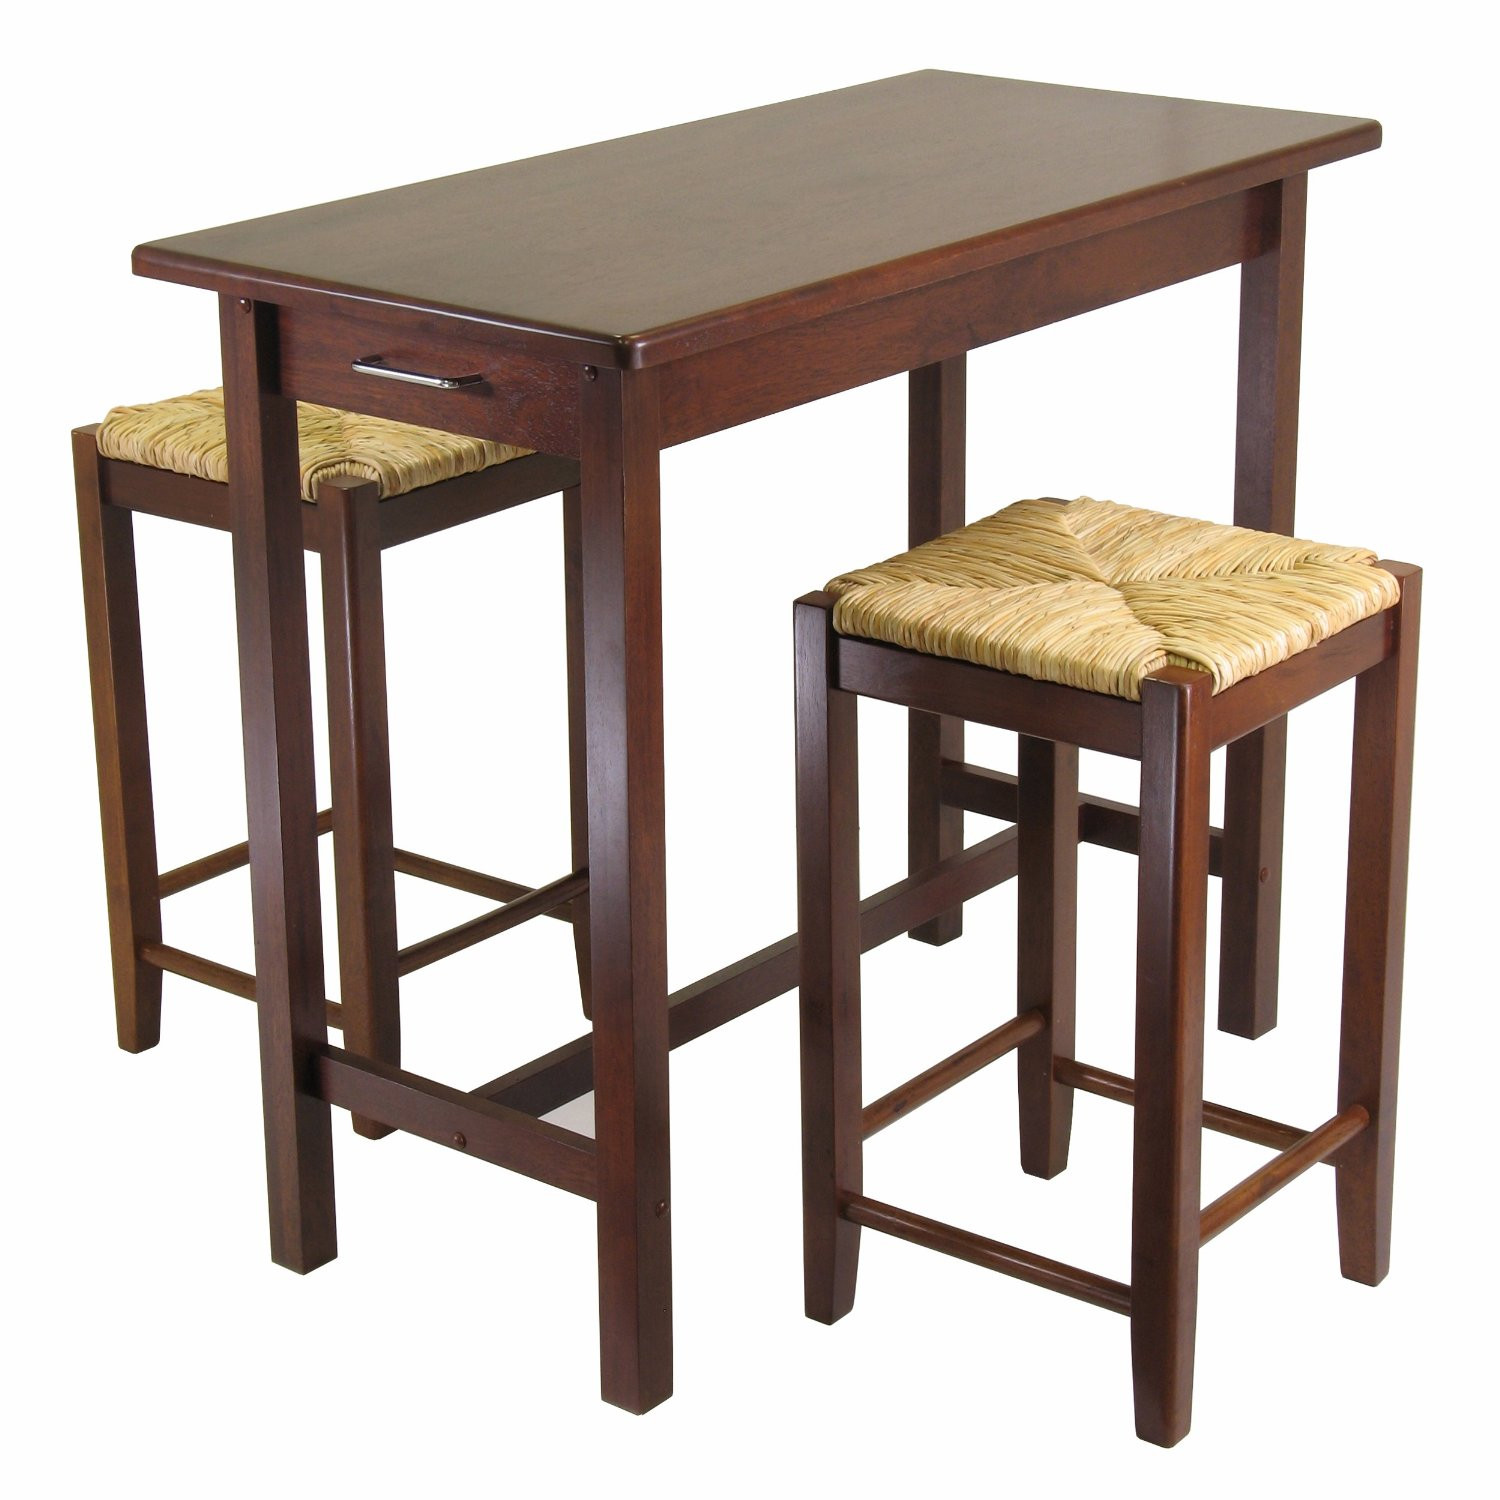 Small Wooden Kitchen Tables
 Small Rectangular Kitchen Table – HomesFeed